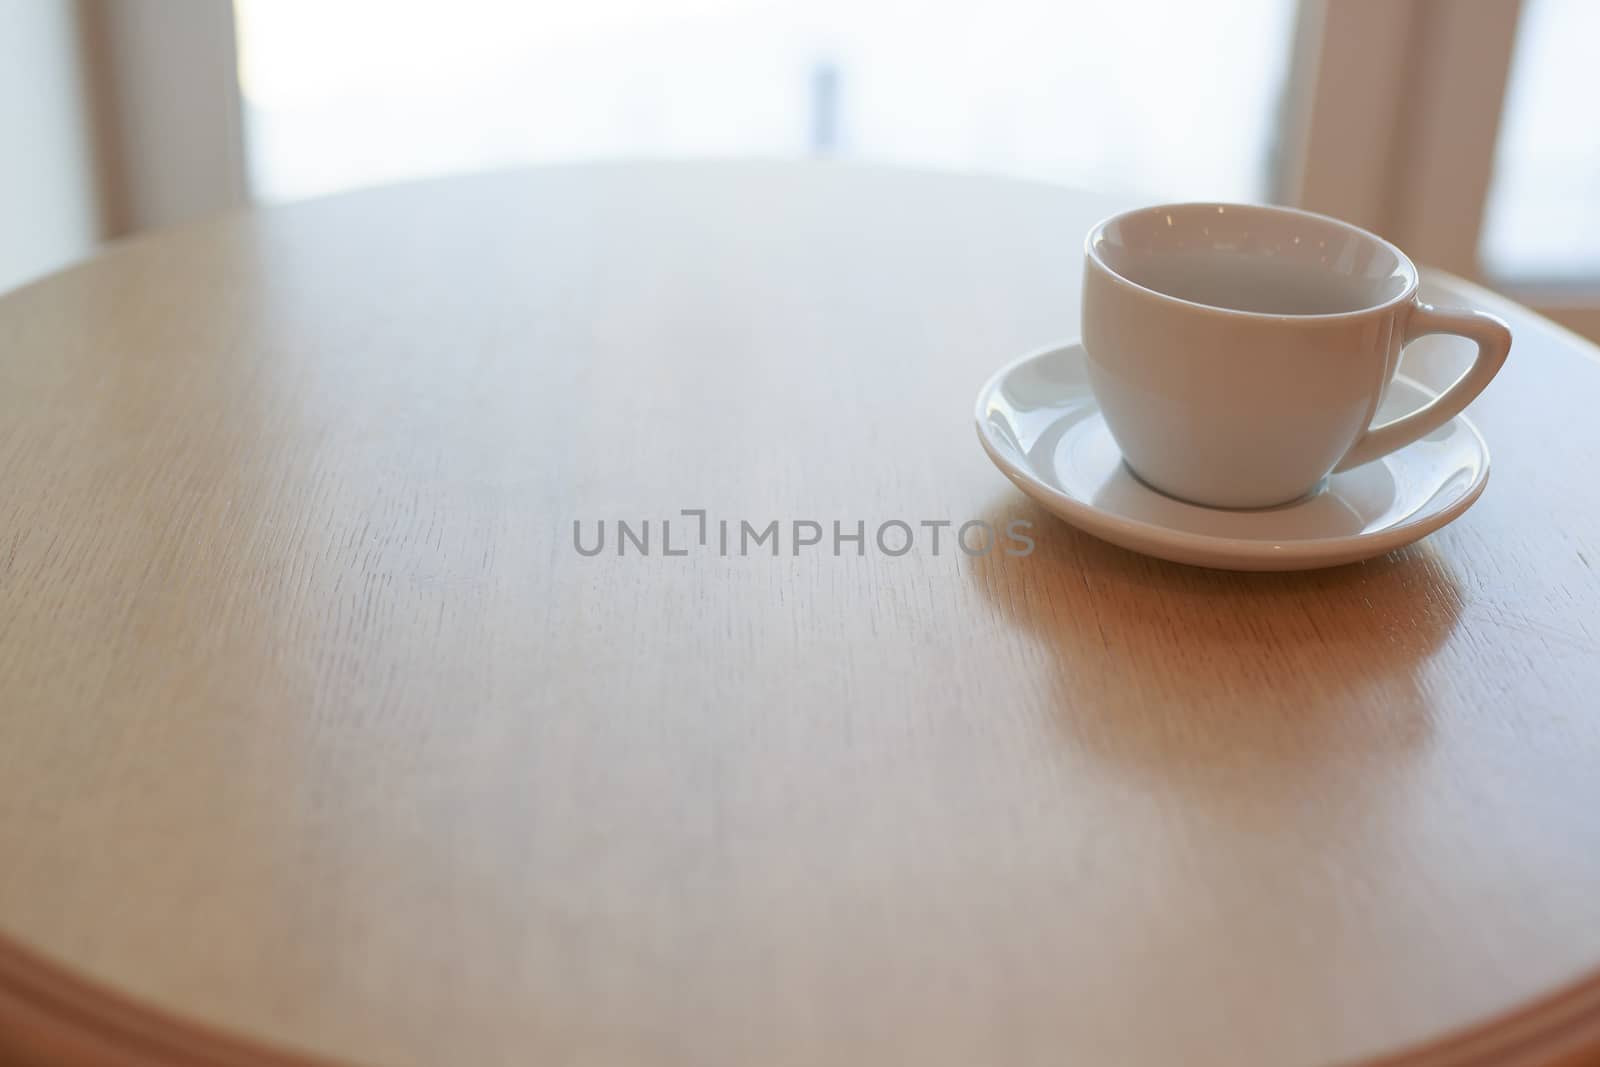 one pure white ceramic Cup and saucer without drink sits on a wooden table in the afternoon sunlight